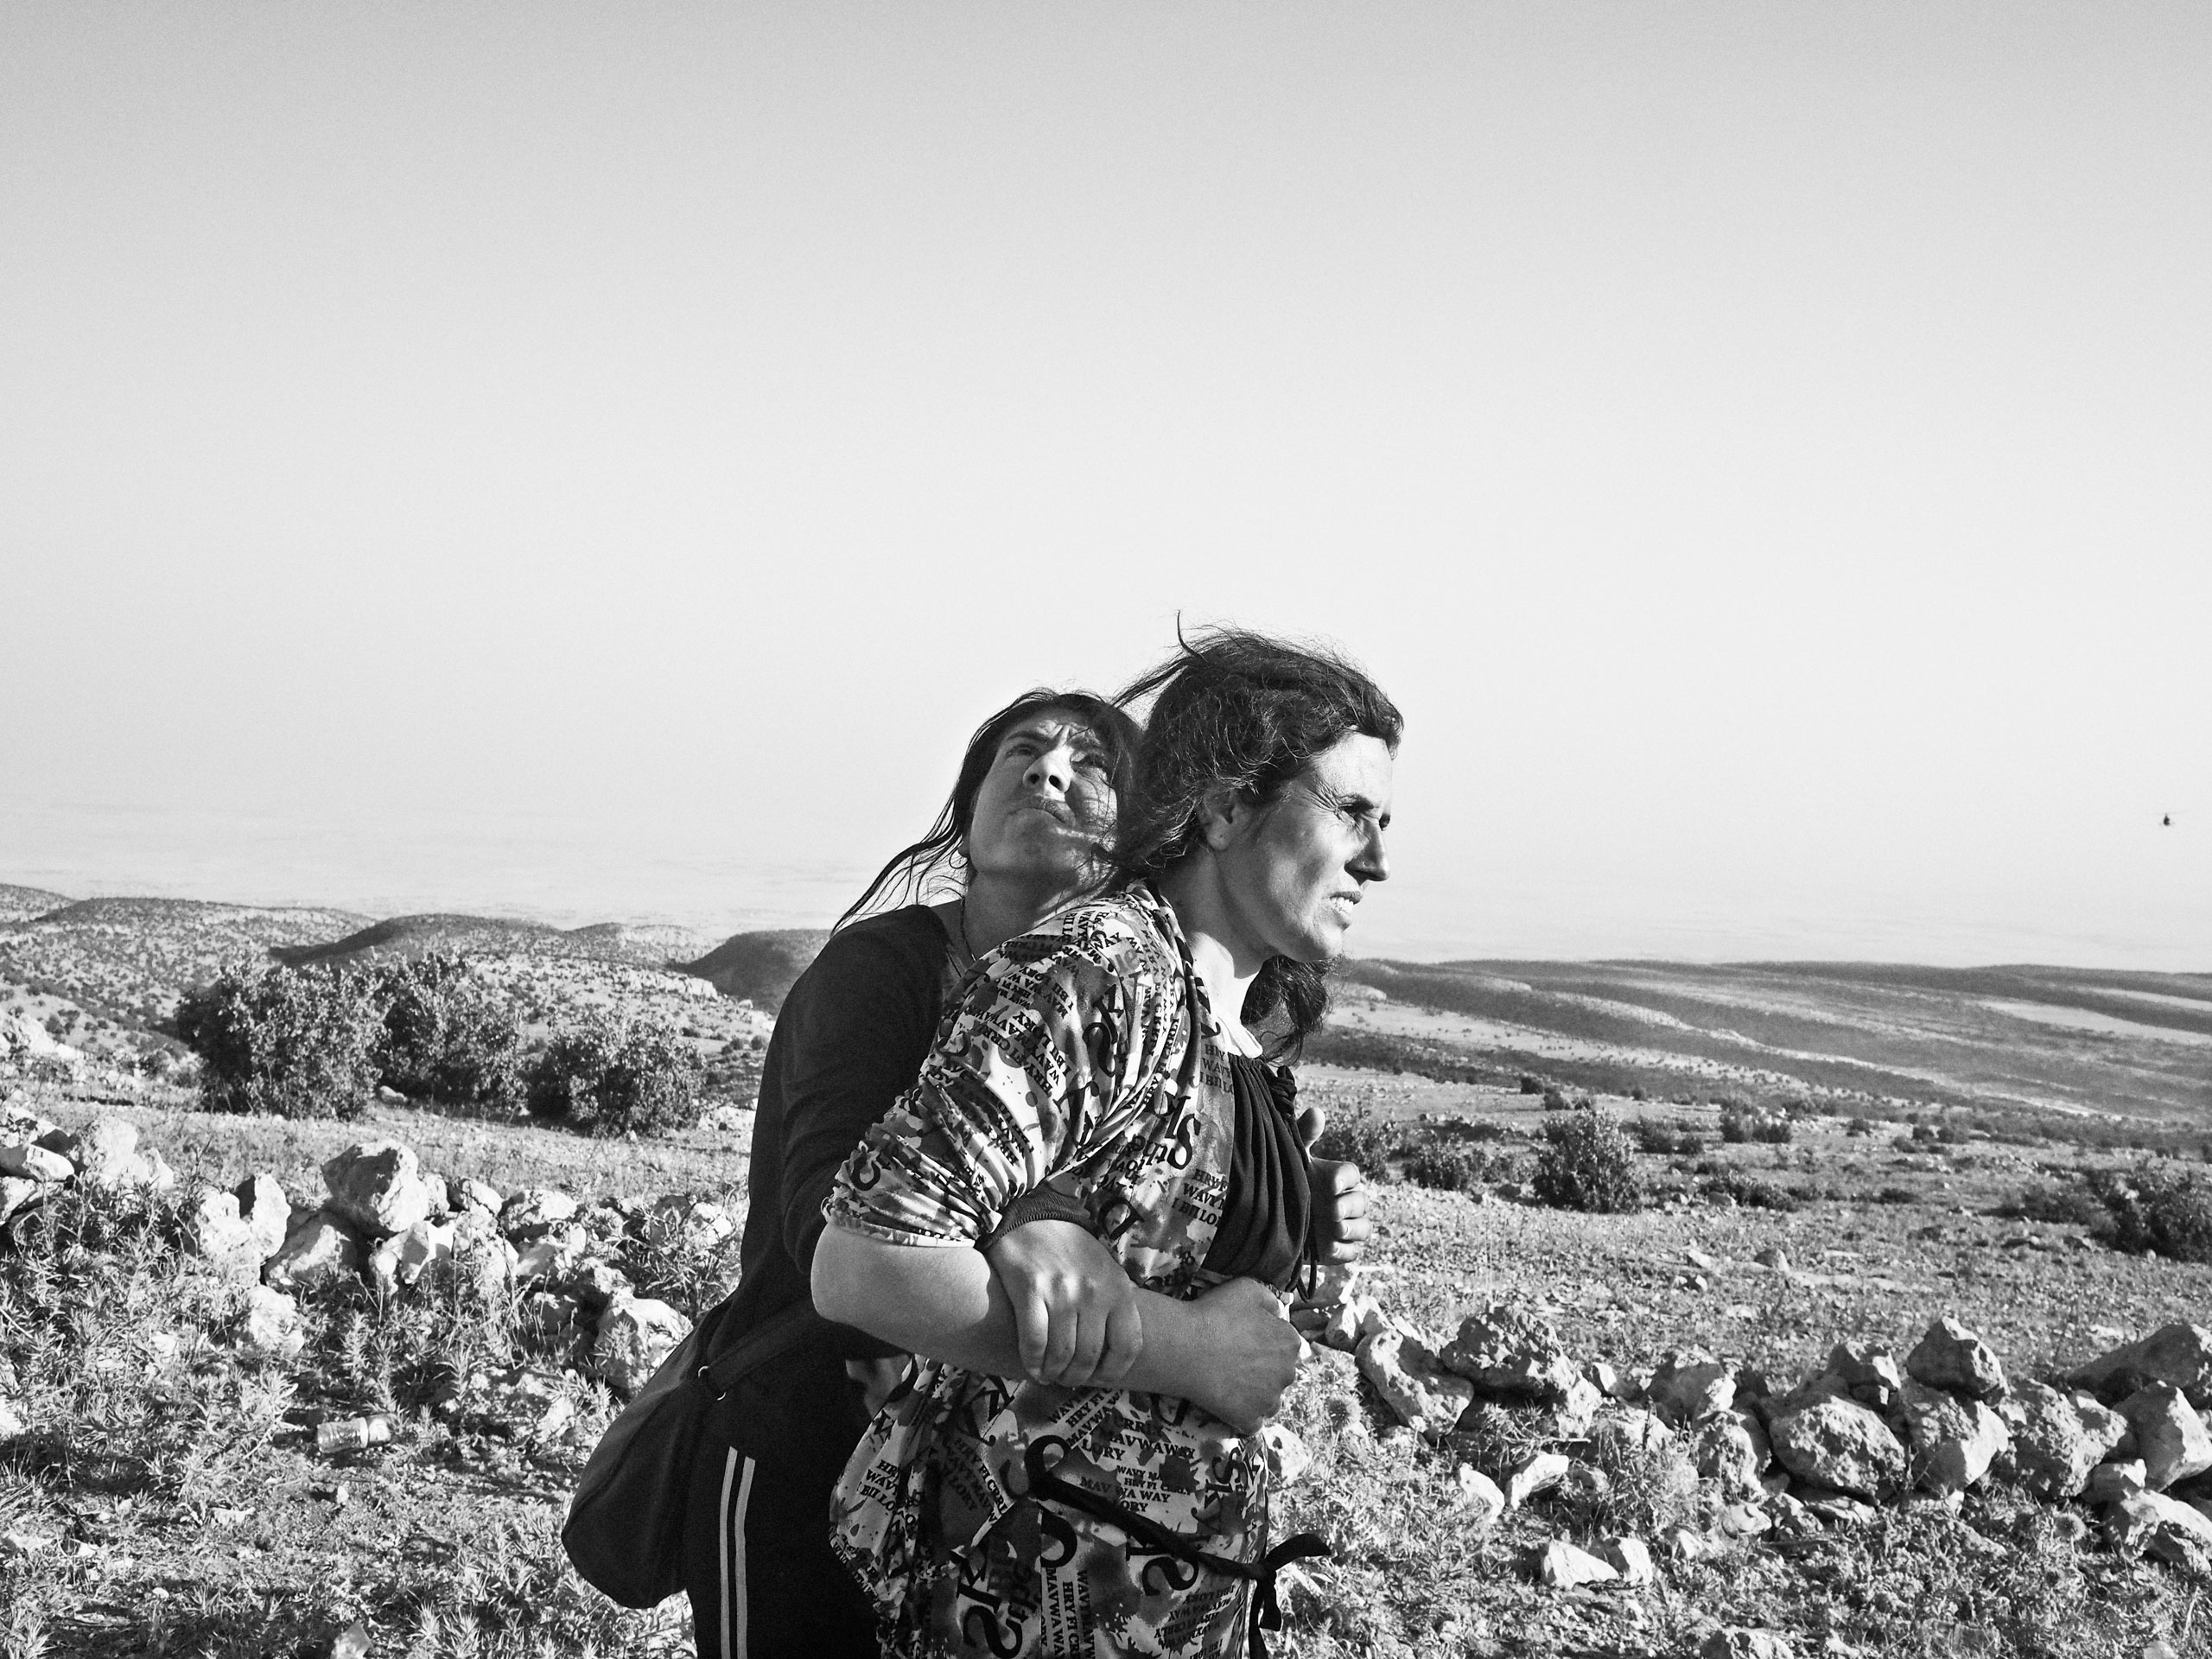 Yezidi women stranded in the Sinjar Mountains wait for the arrival of a rescue helicopter. Iraq. Aug. 12, 2014.